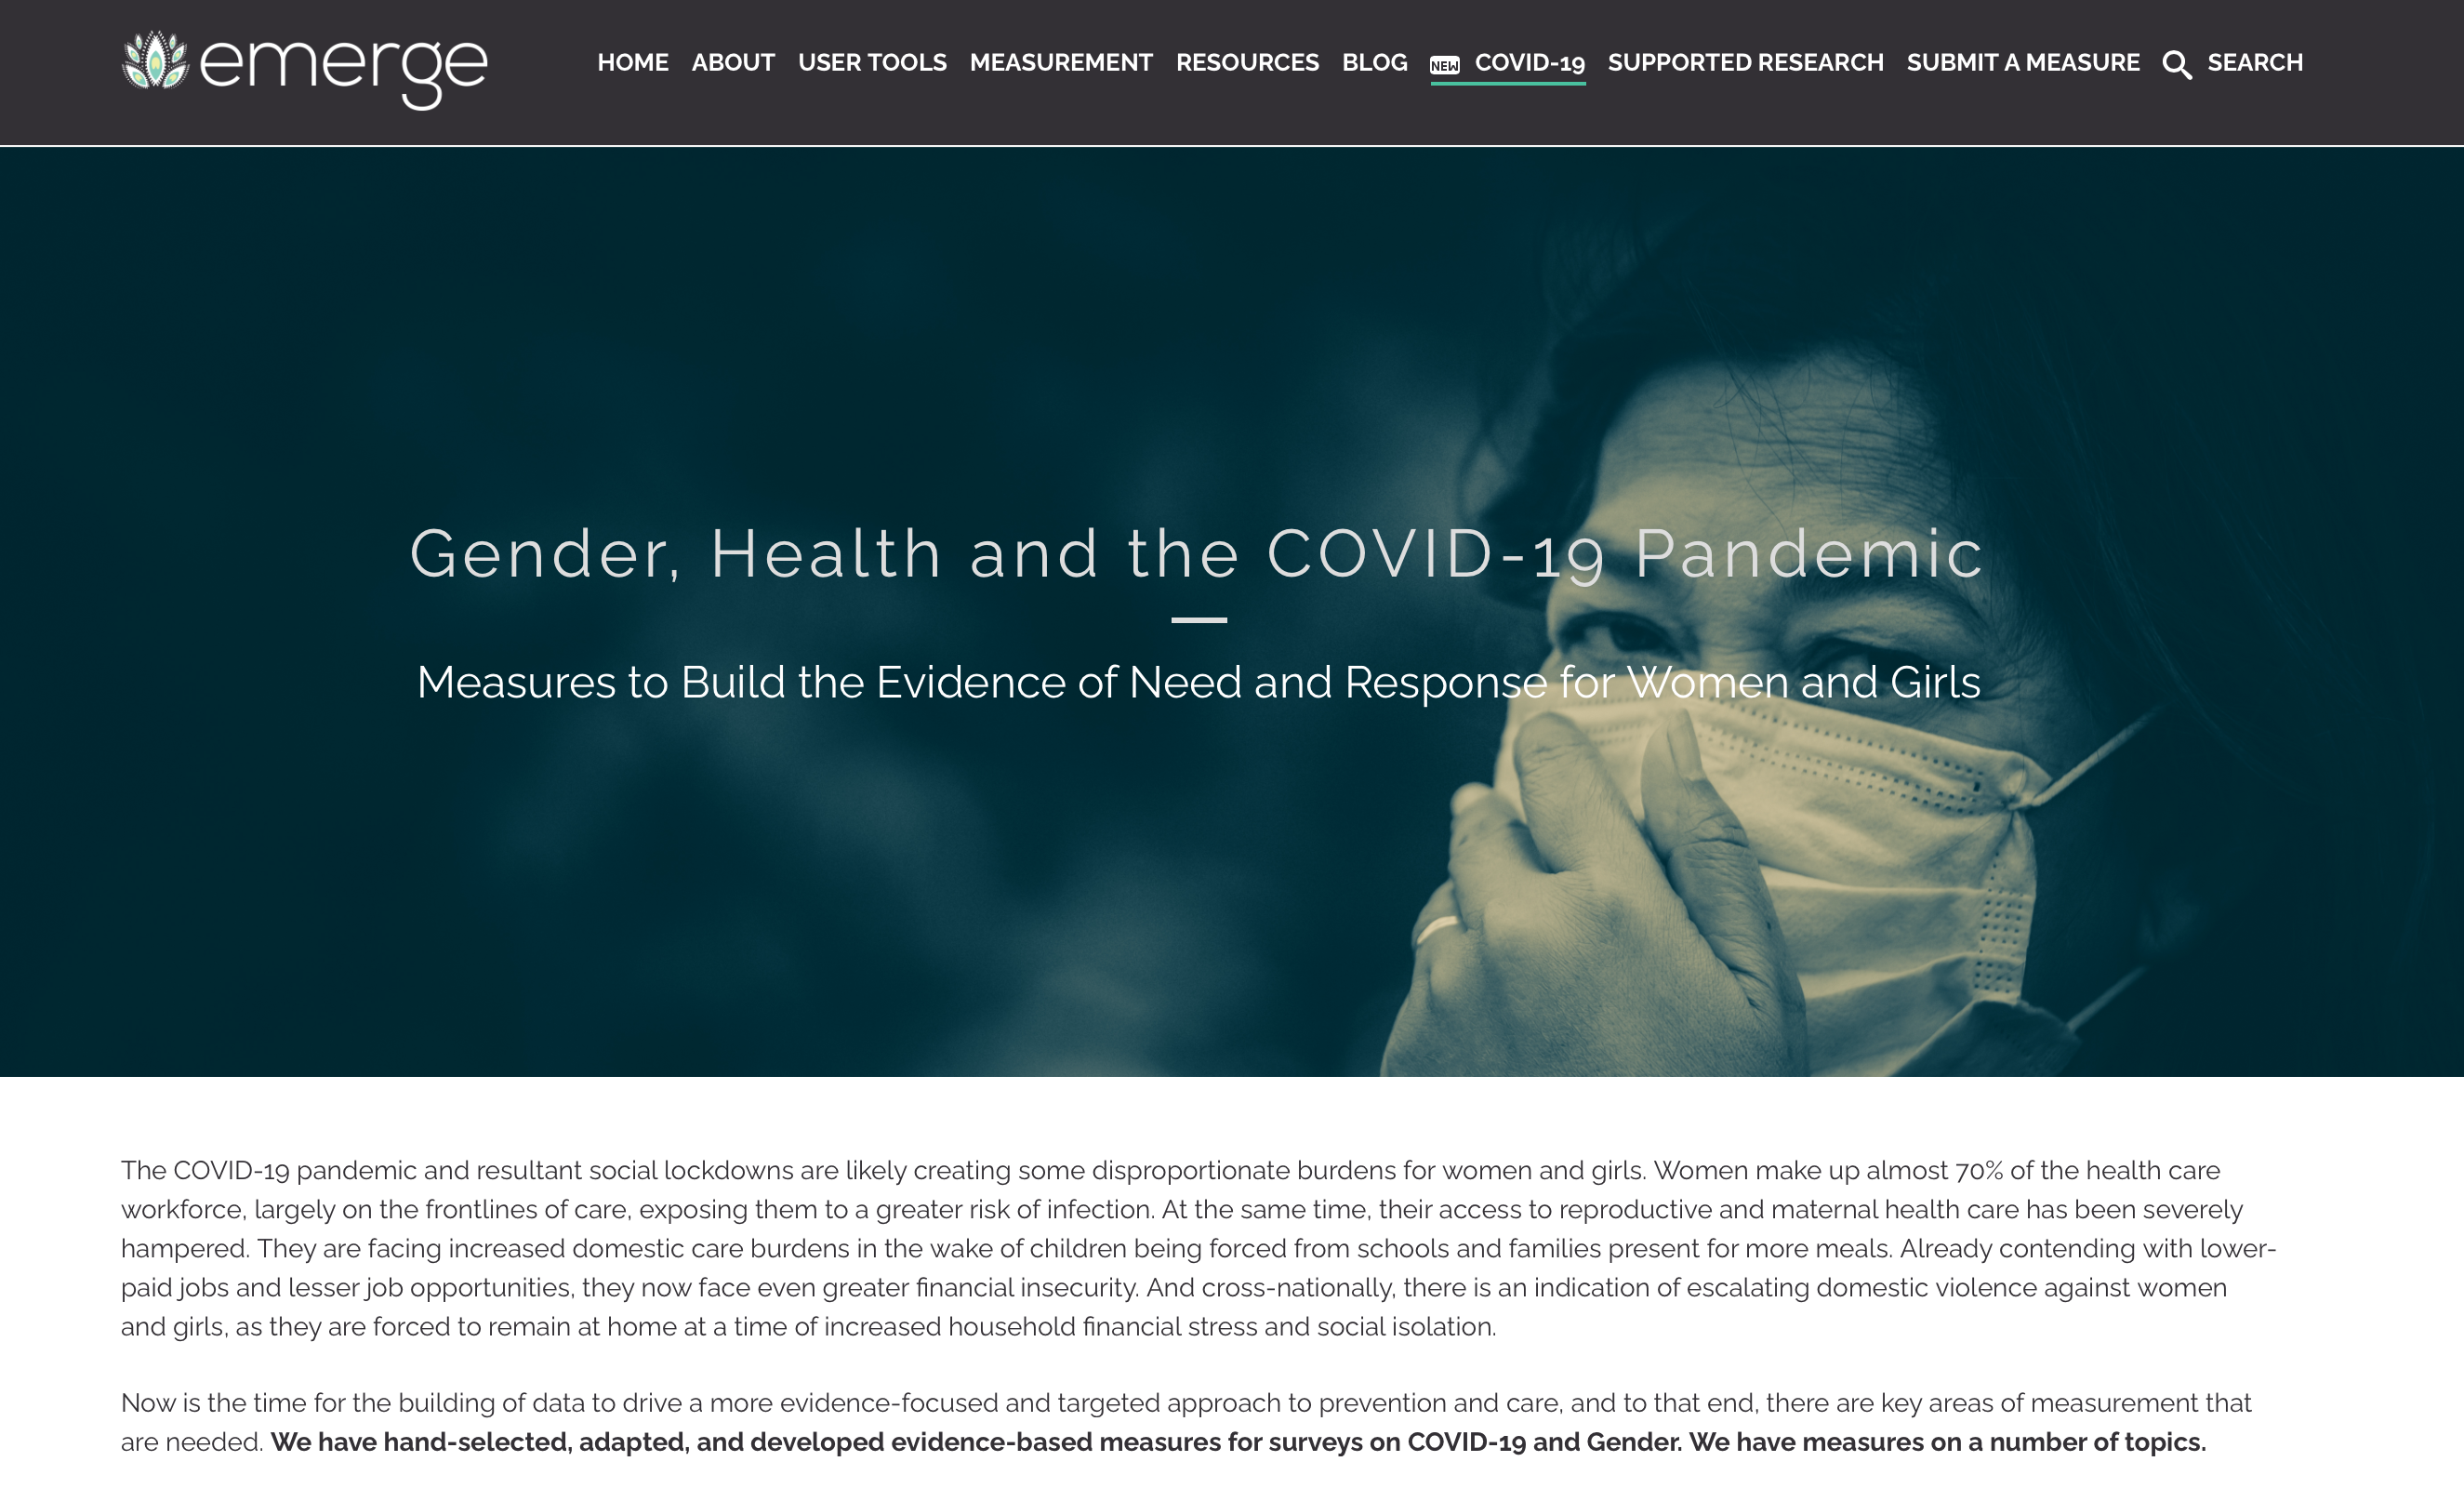 Gender, health and the COVID-19 pandemic: evidence-based measures for surveys on COVID-19 and gender